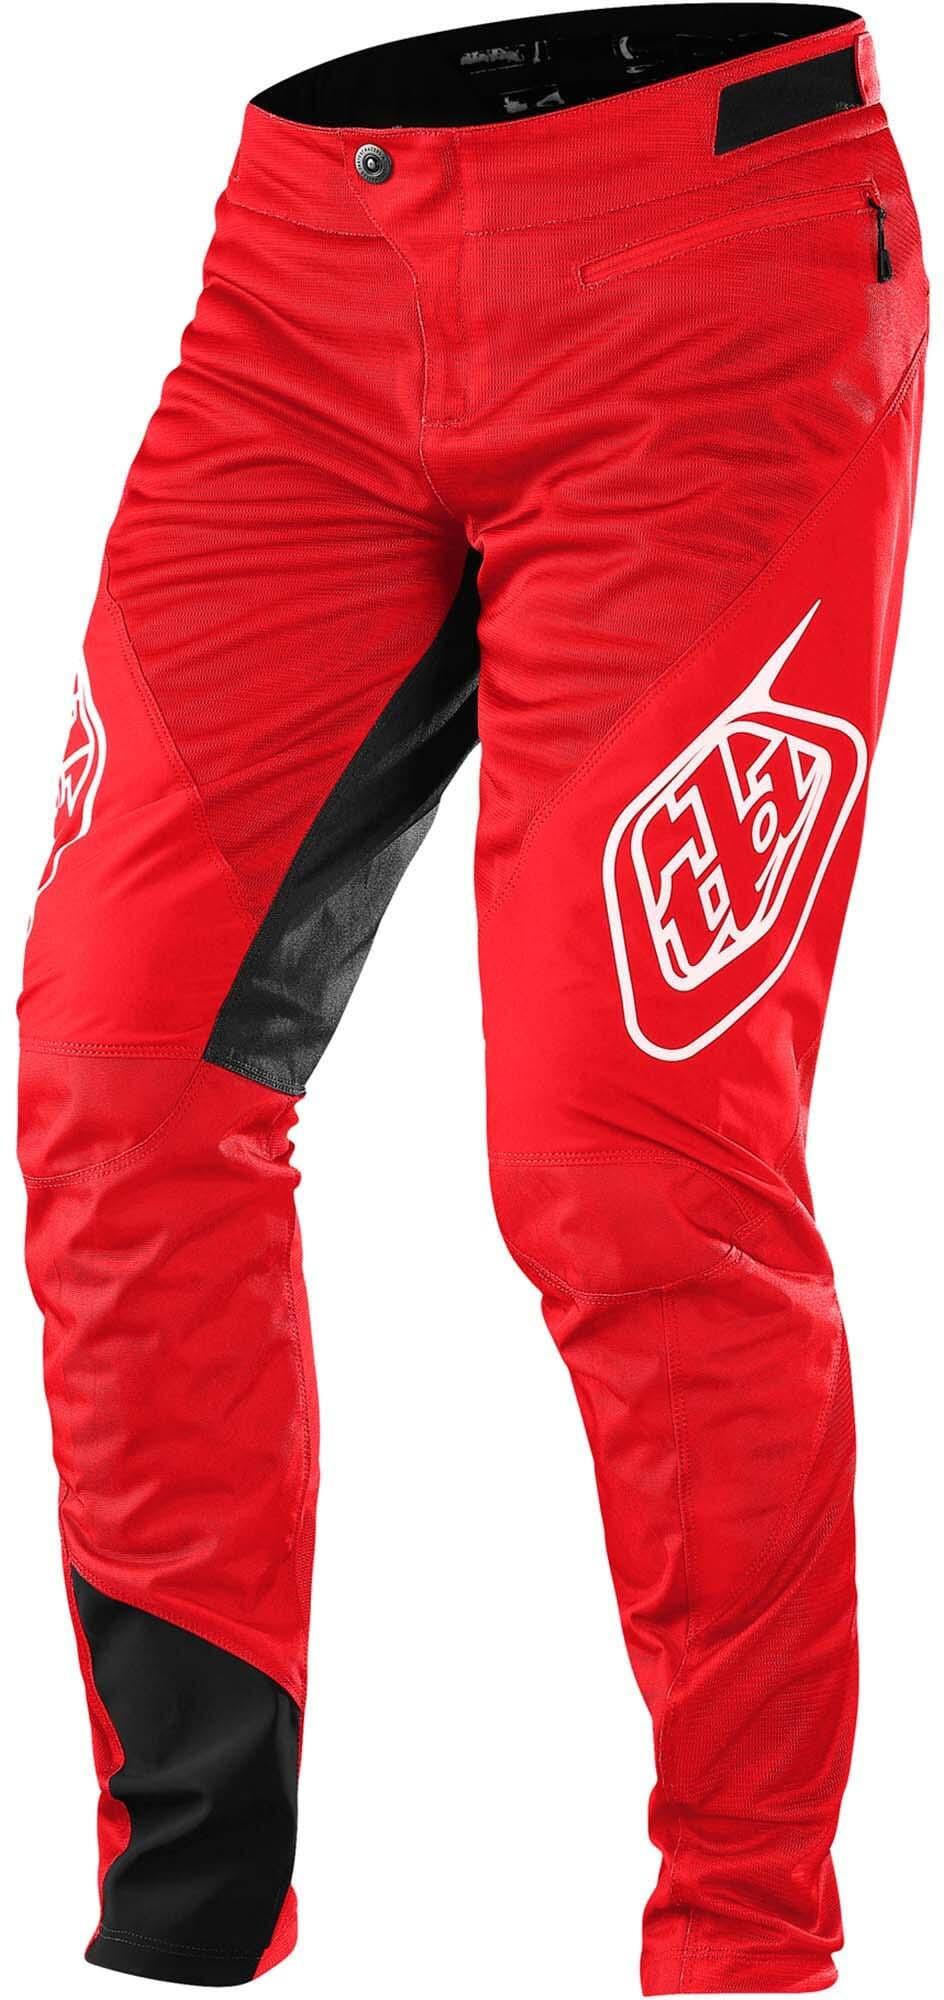 Troy Lee Designs Sprint Pant - Solid Glo Red